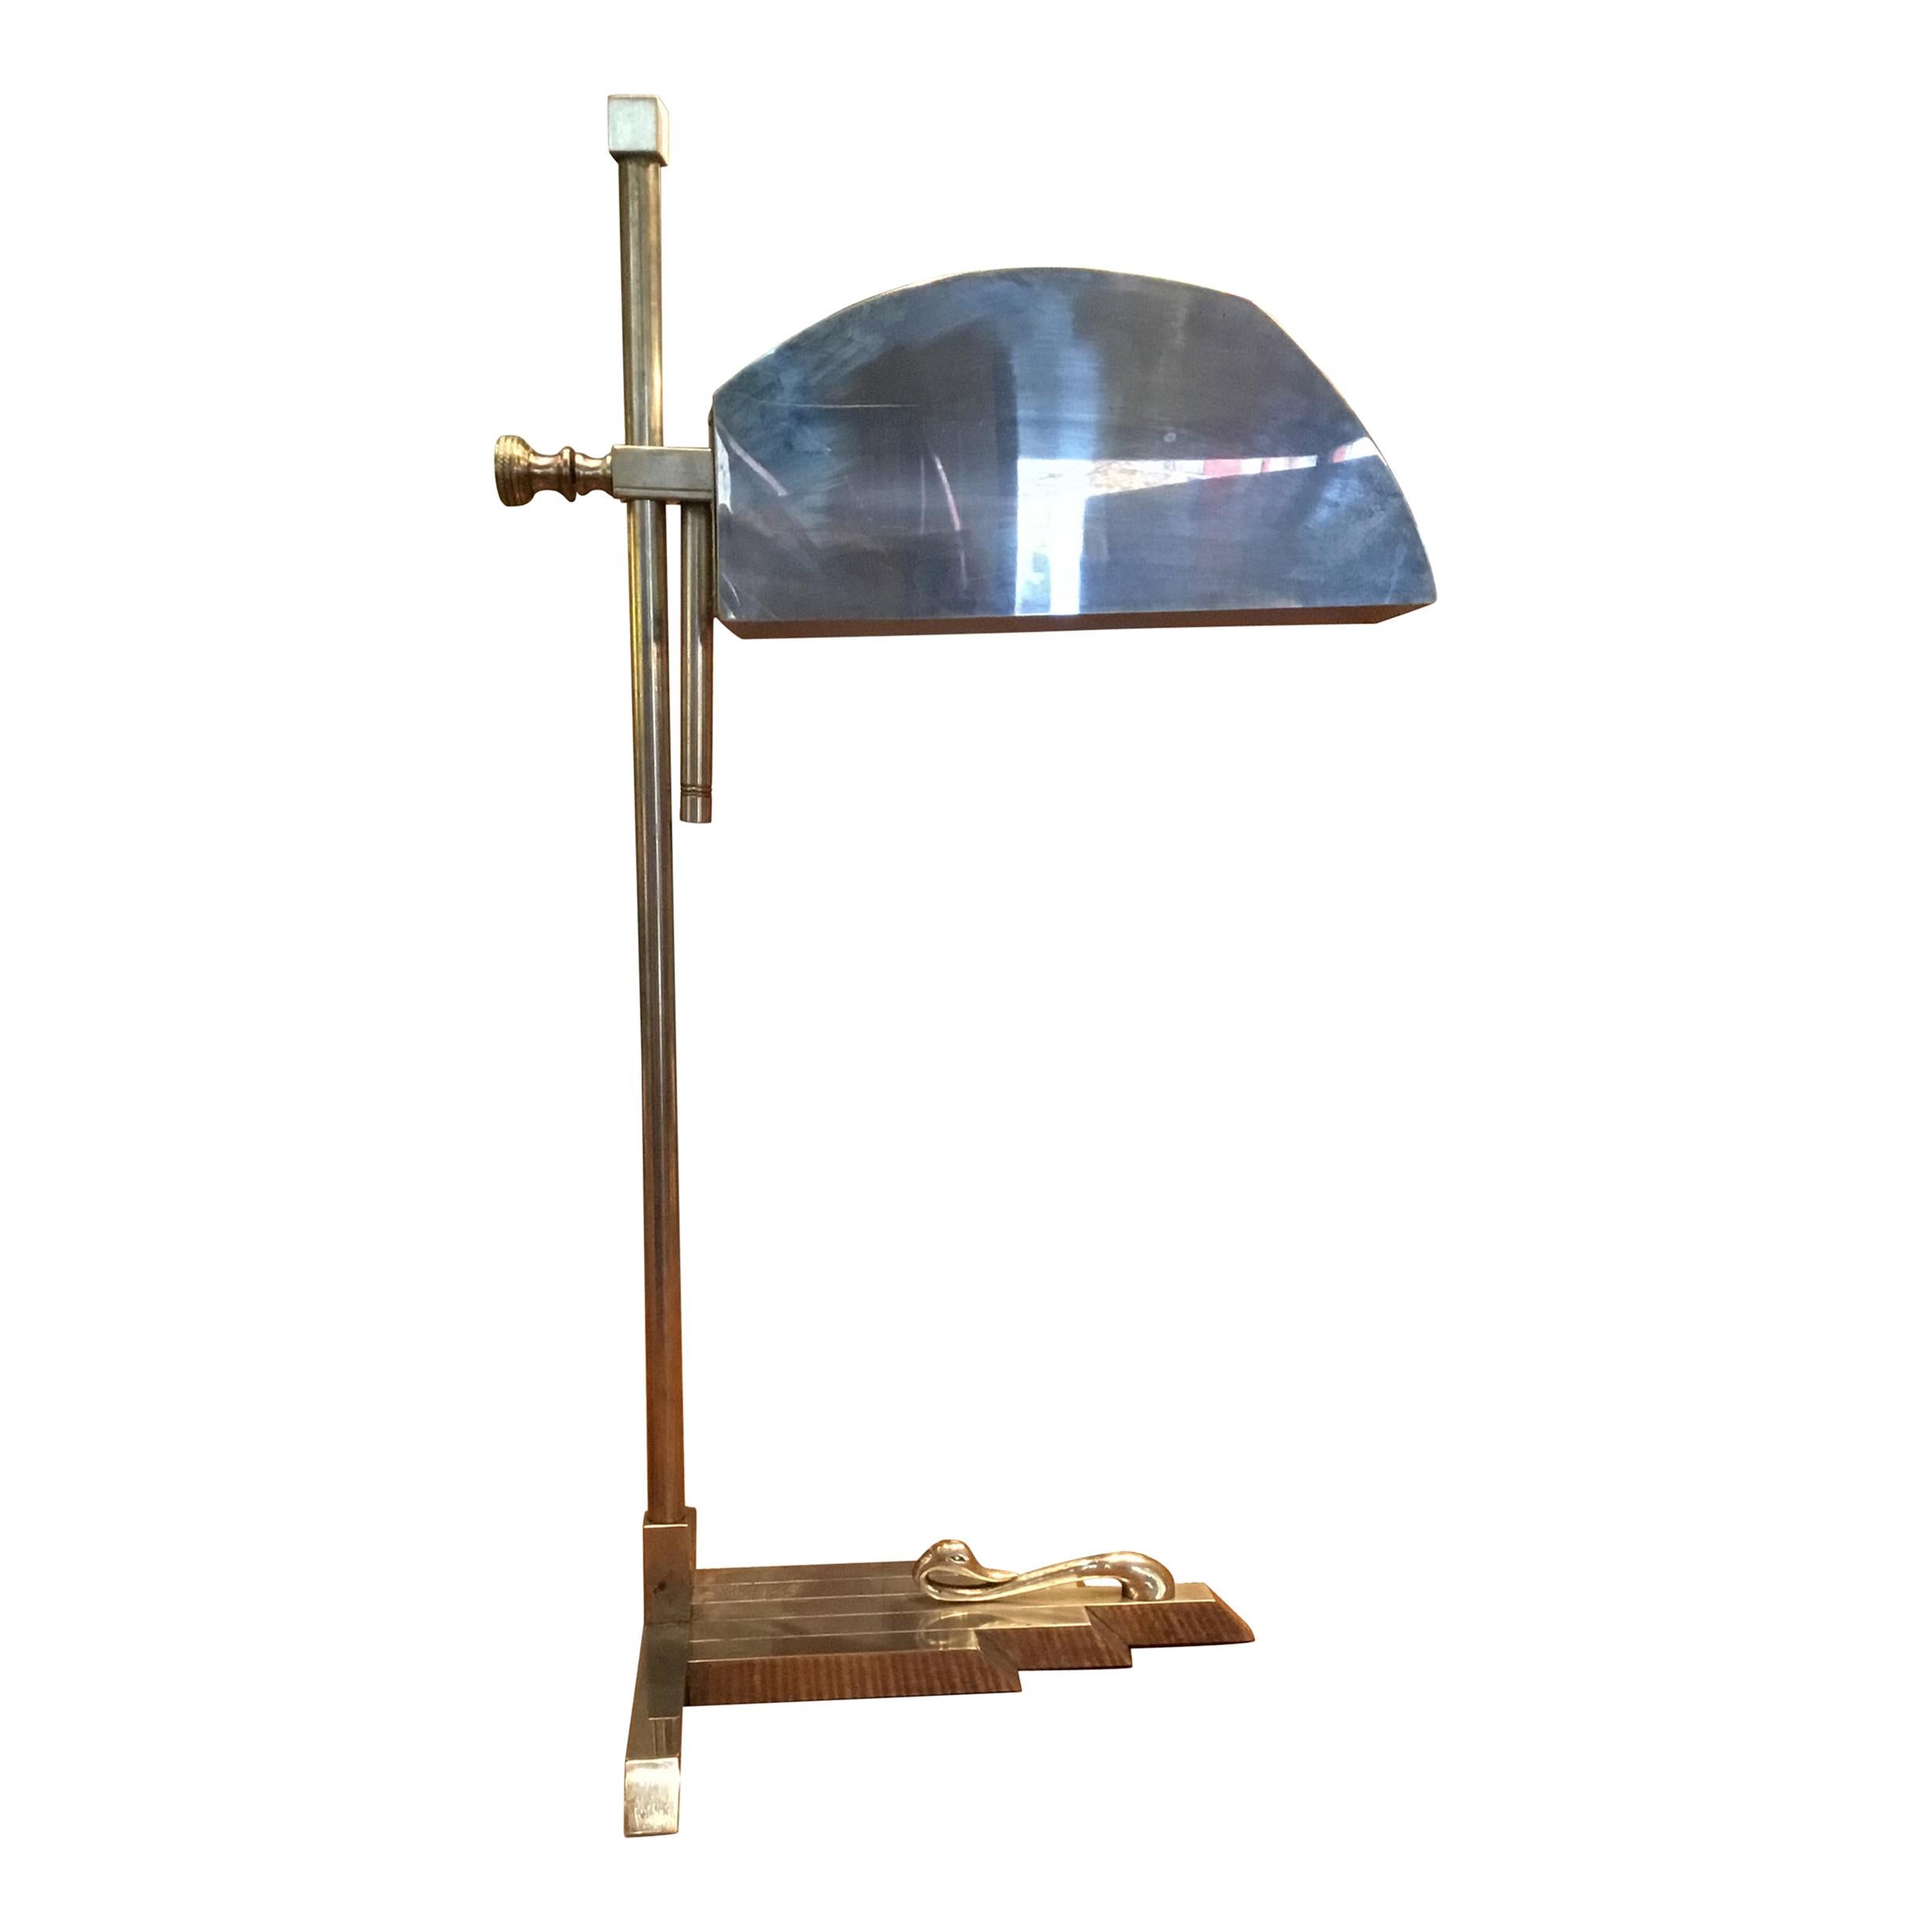 Marcel Breuer table lamp, Exposition of Paris 1925, Made in Germany Bauhaus